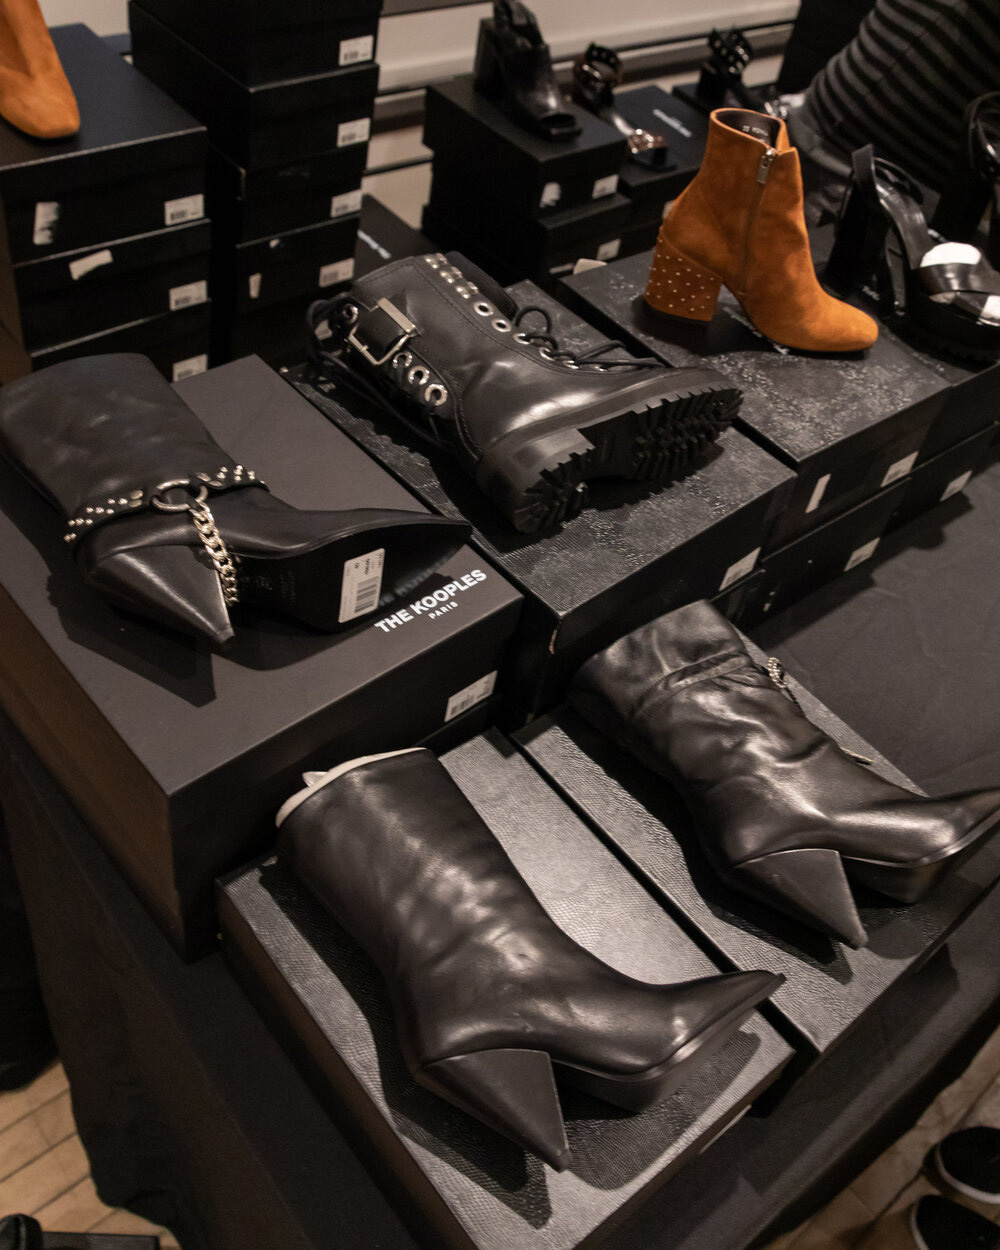 The Kooples Sample Sale in Images